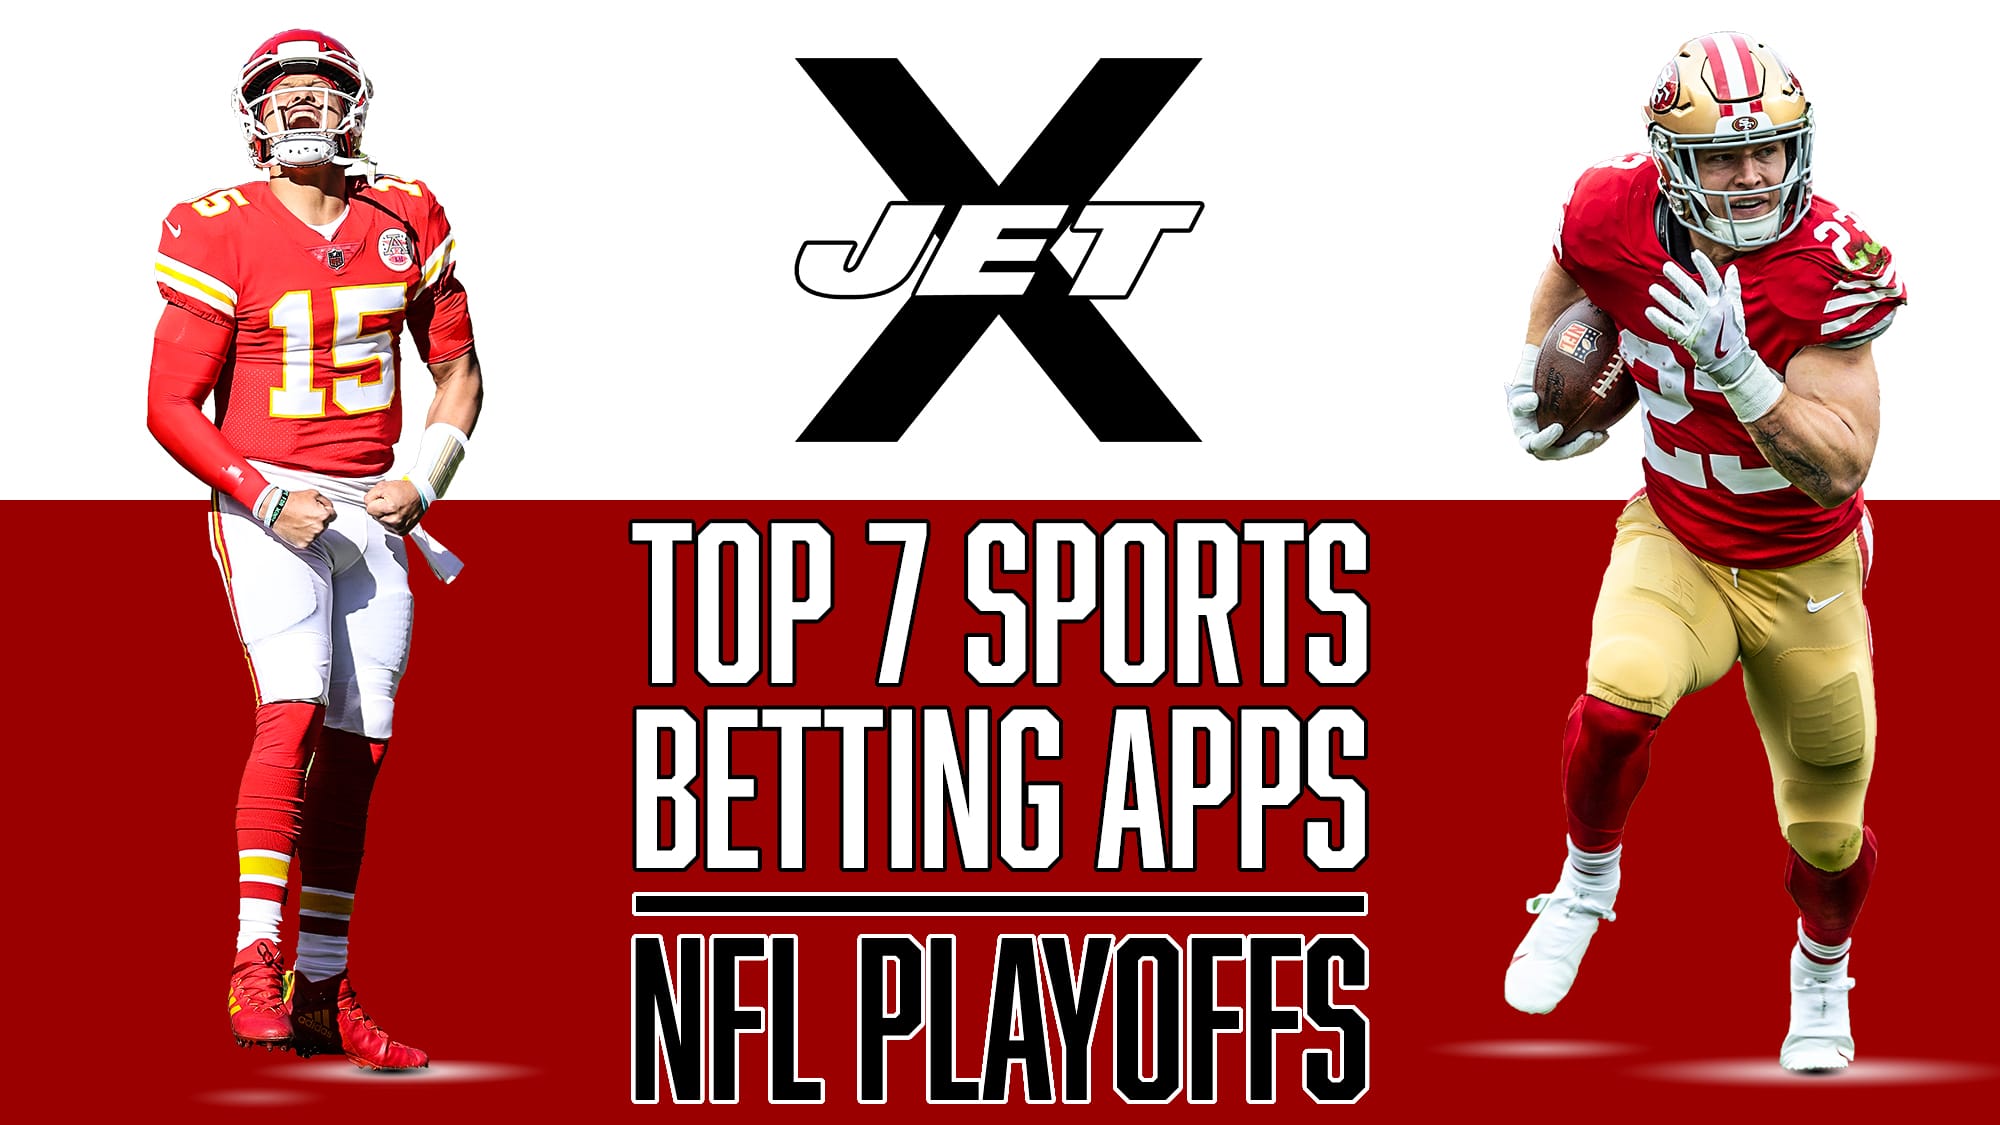 Top 7 Sports Betting Apps, NFL Playoffs, Patrick Mahomes, Christian McCaffrey